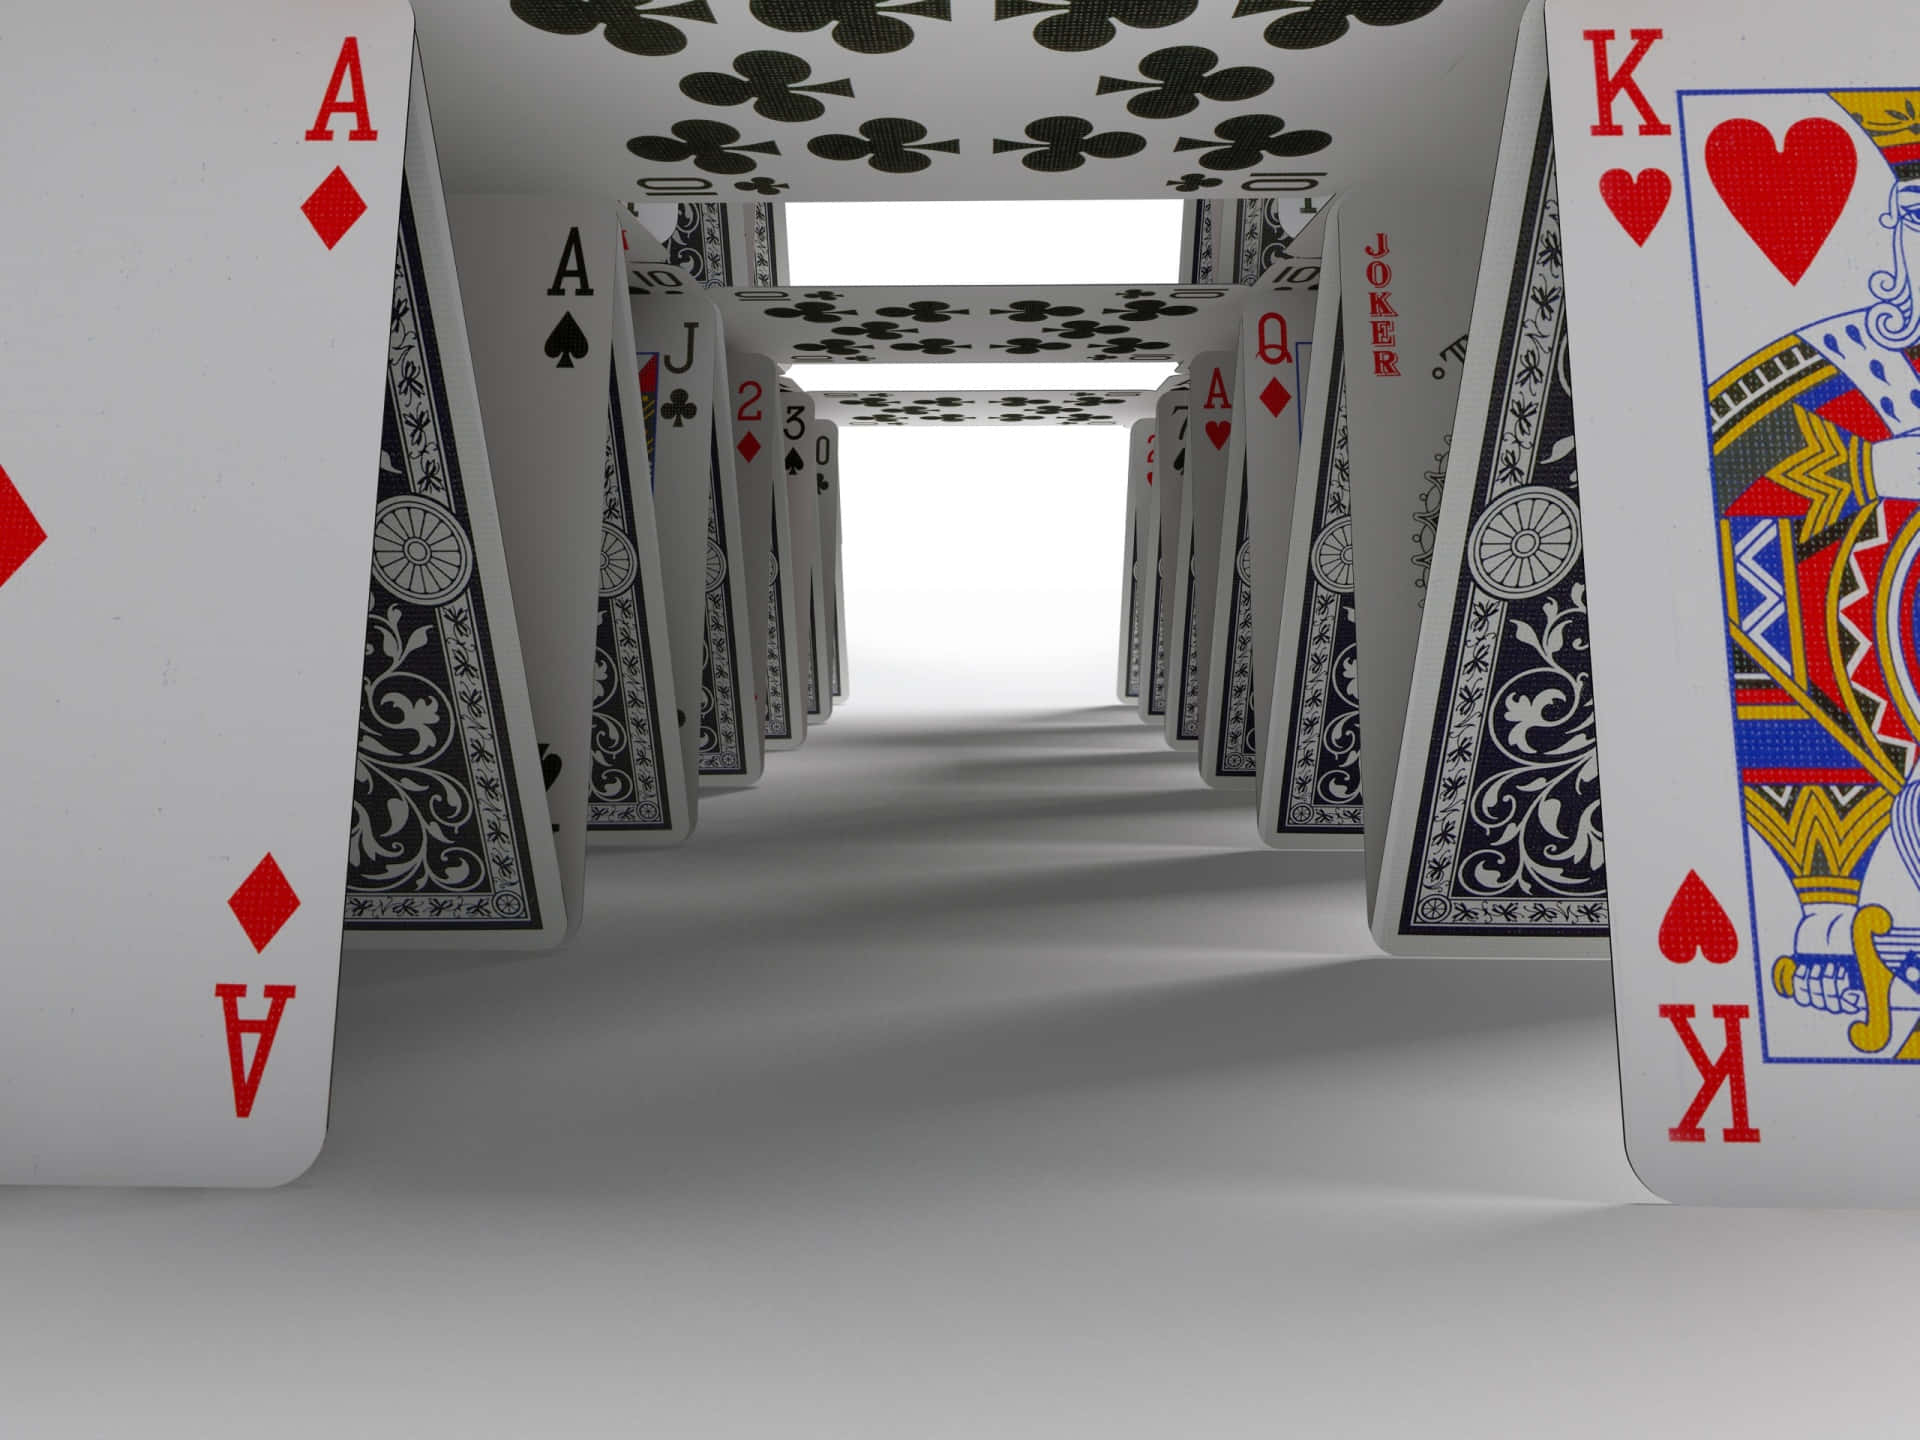 A 3d Rendering Of A Poker Game With Playing Cards